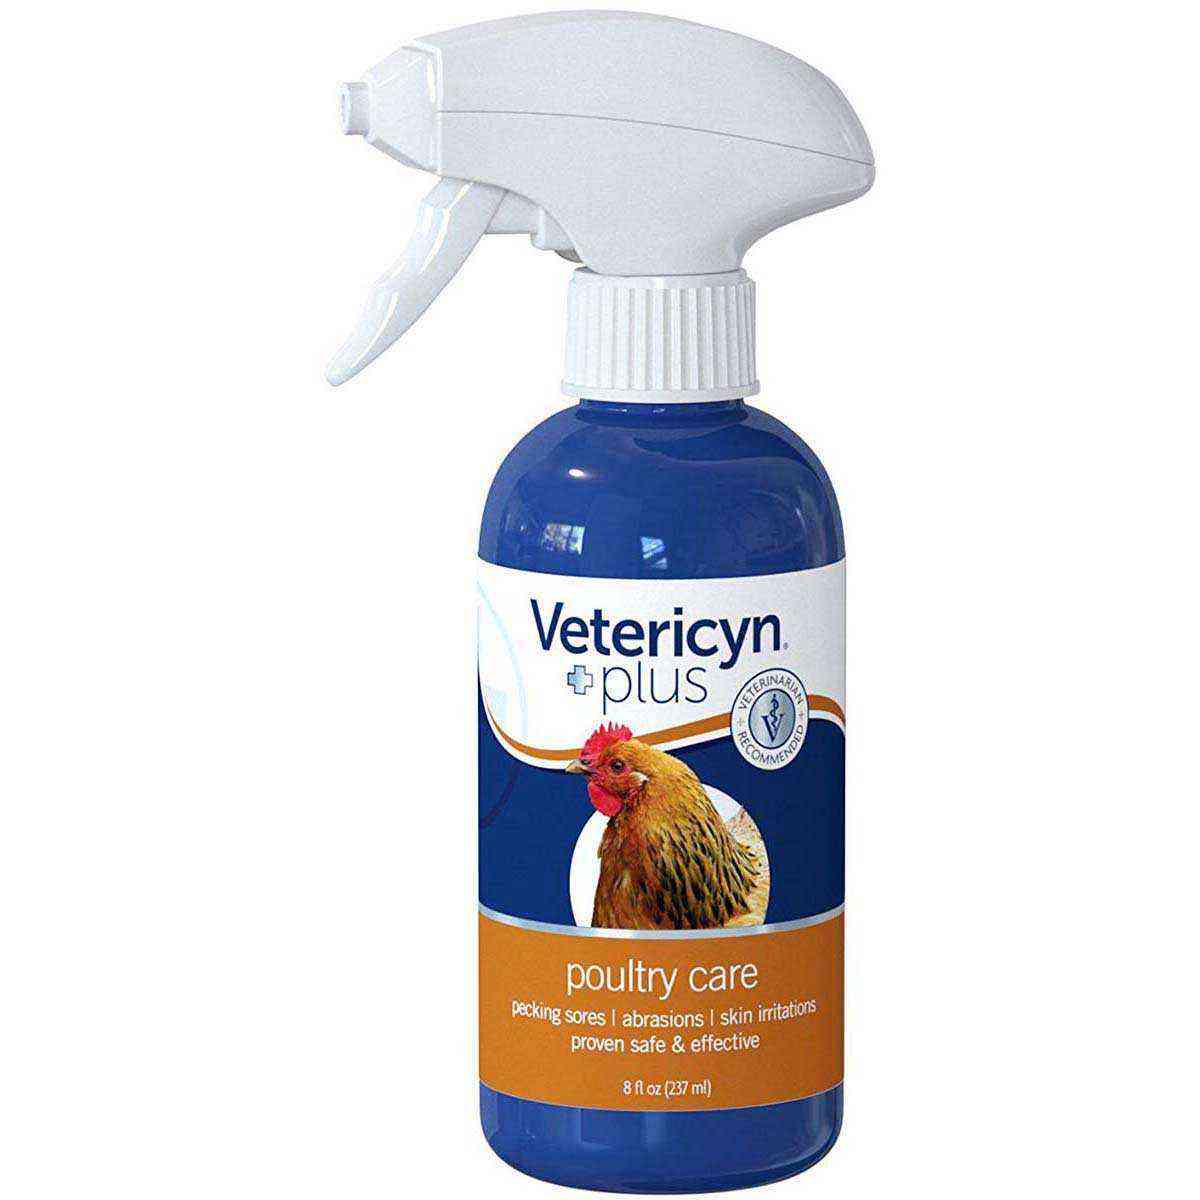 Chickens: Metronidazole for chickens